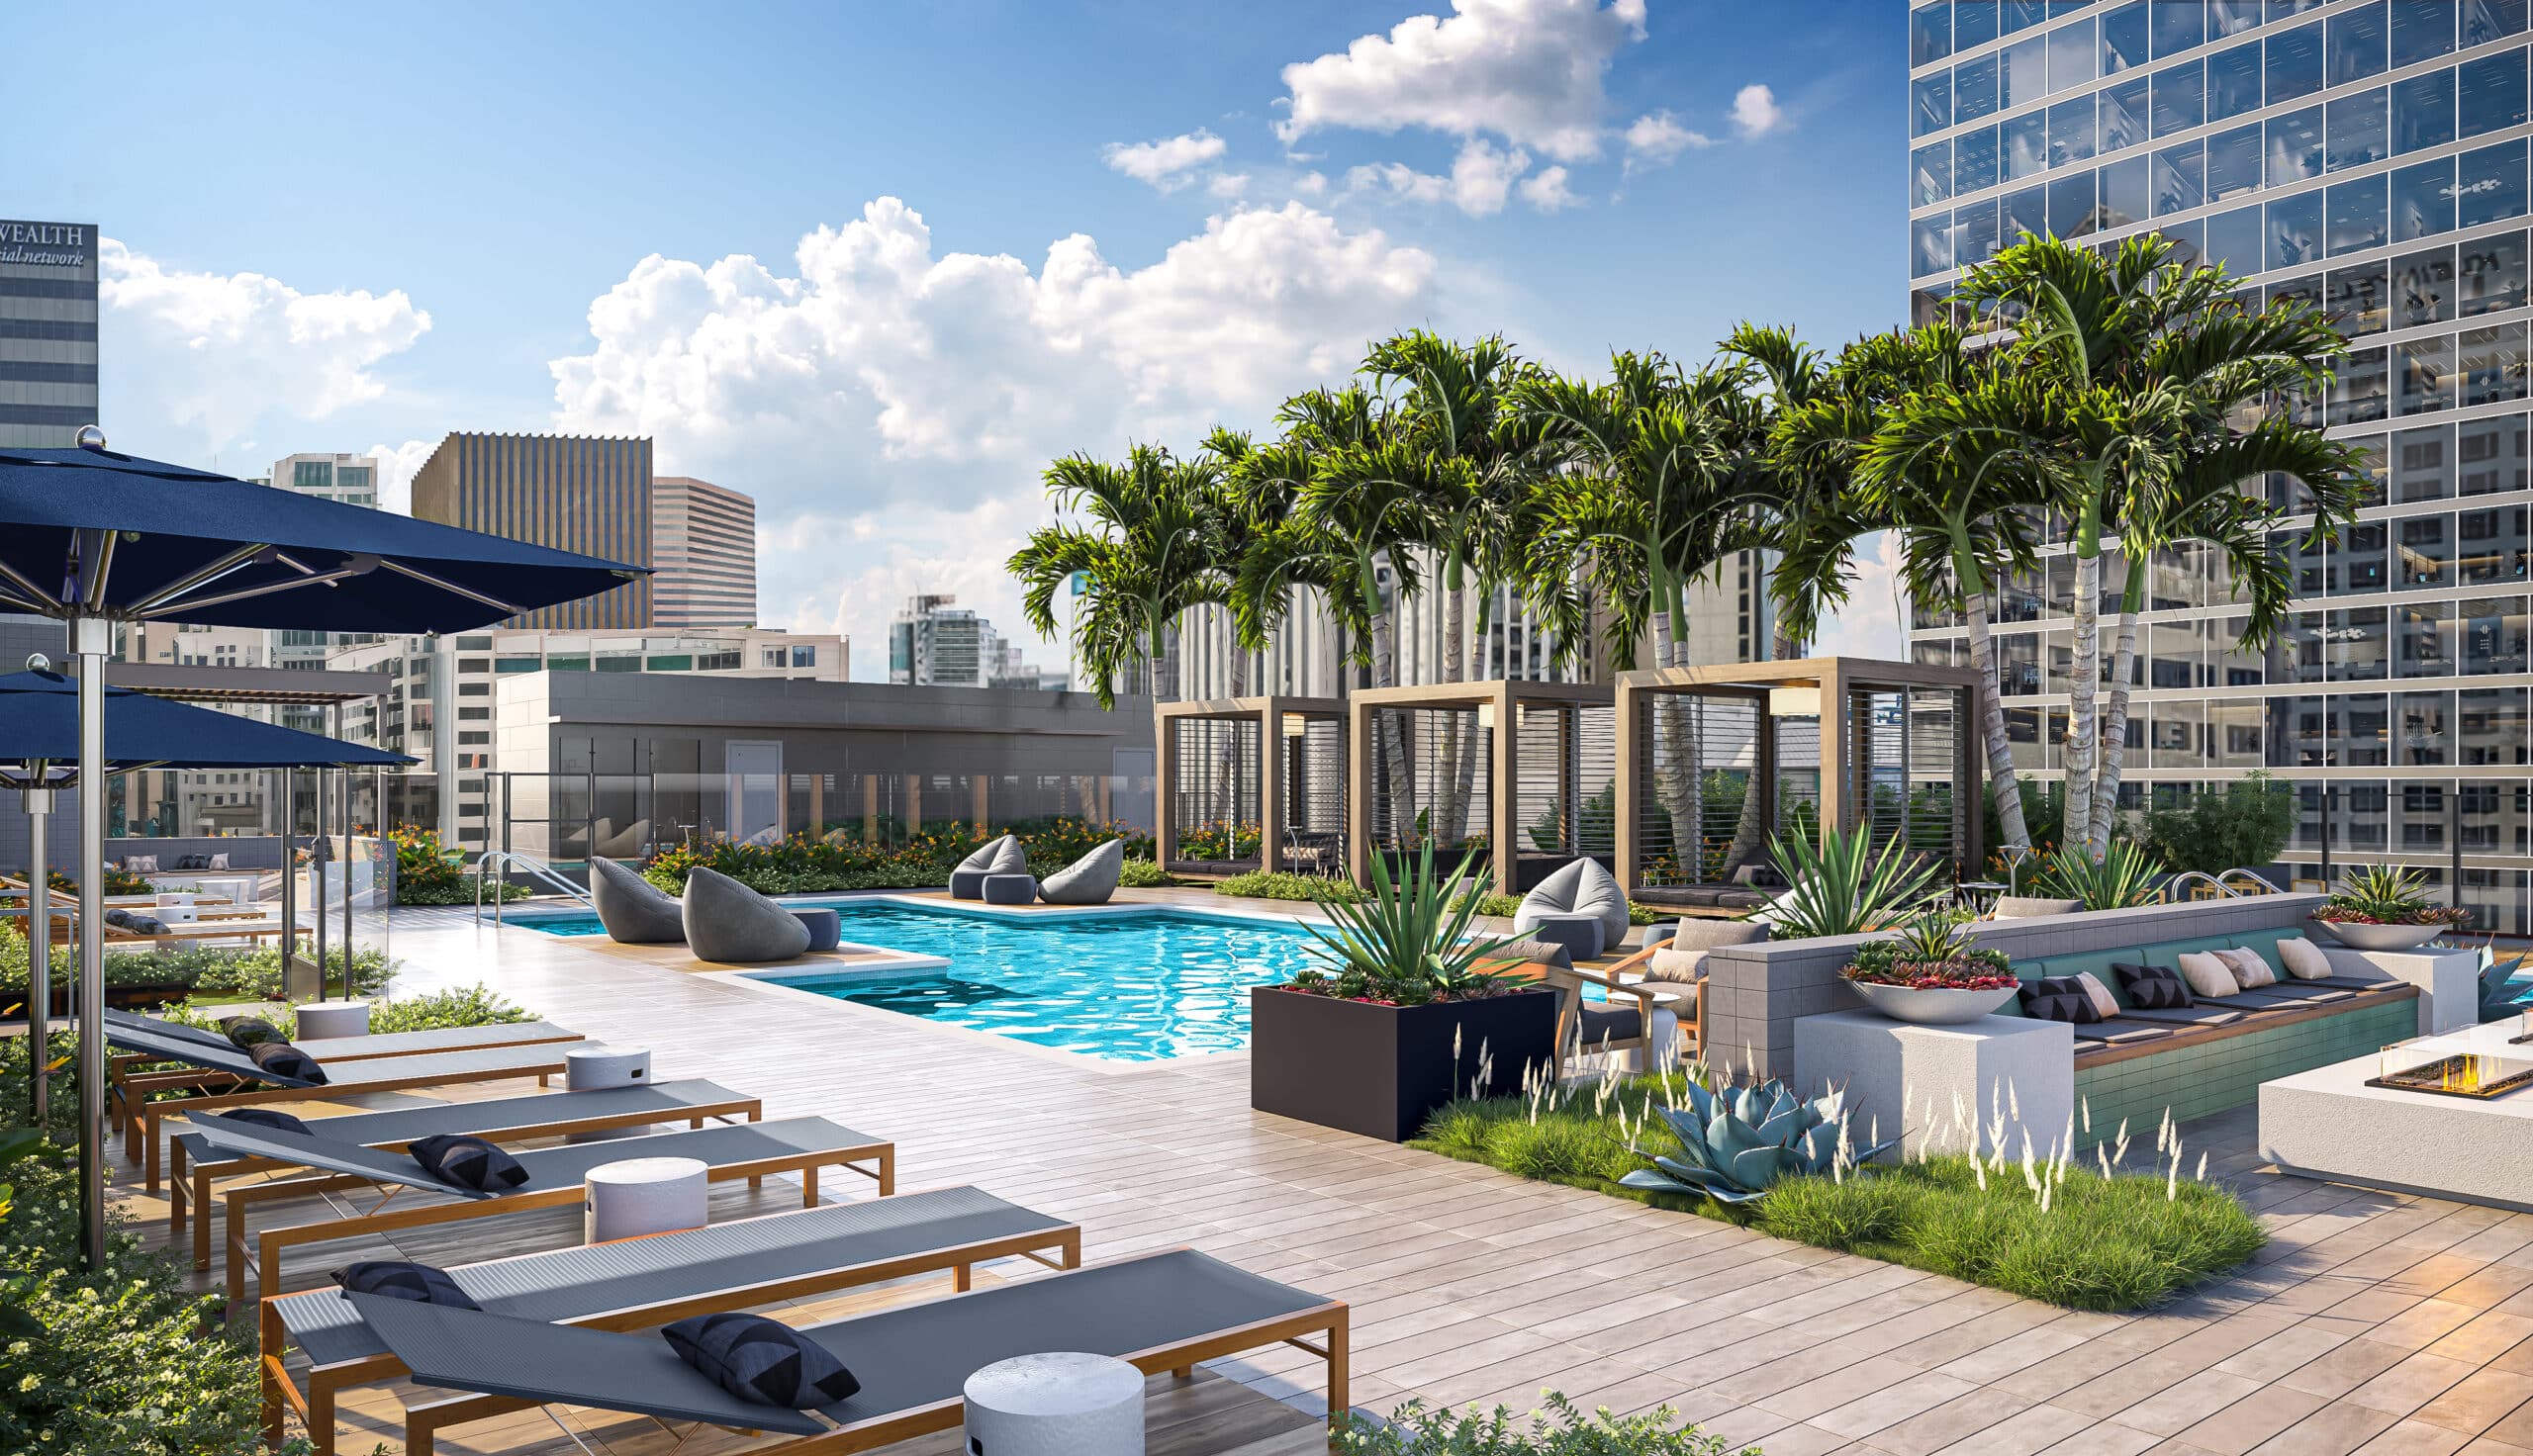 Pool deck on a rooftop with palm trees and lounge seating